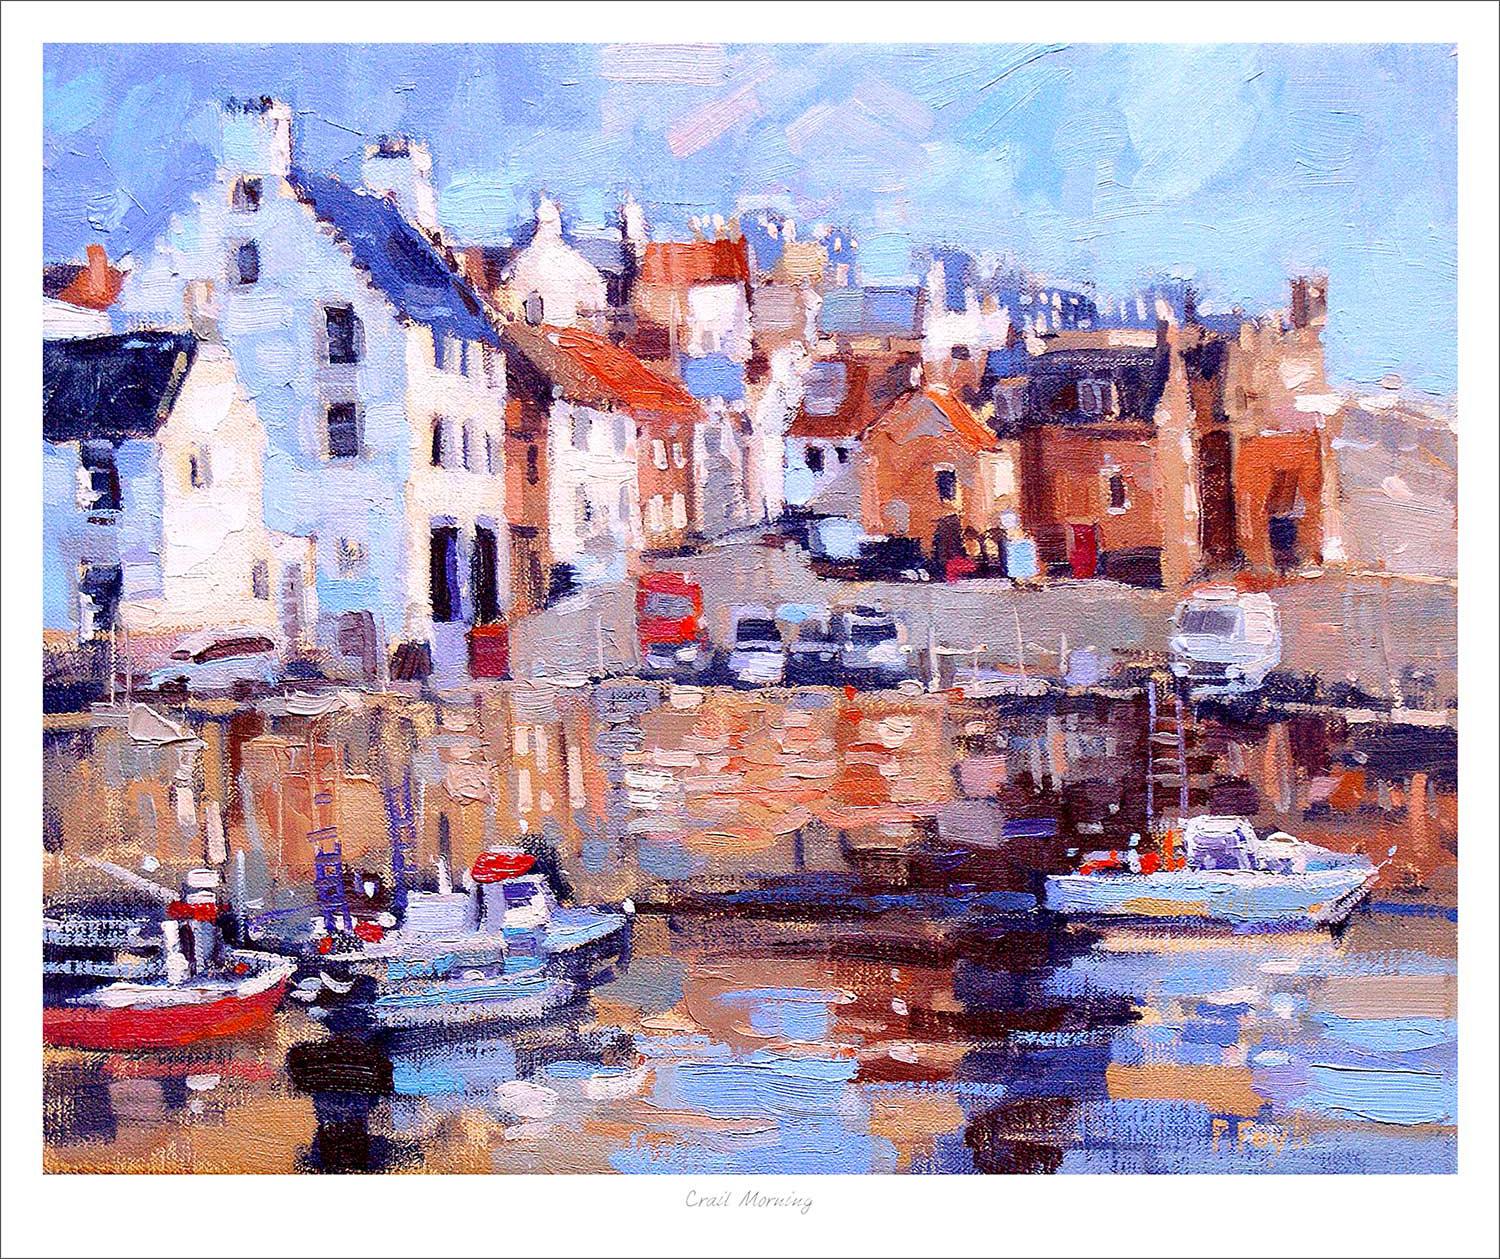 Crail Morning Art Print from an original painting by artist Peter Foyle